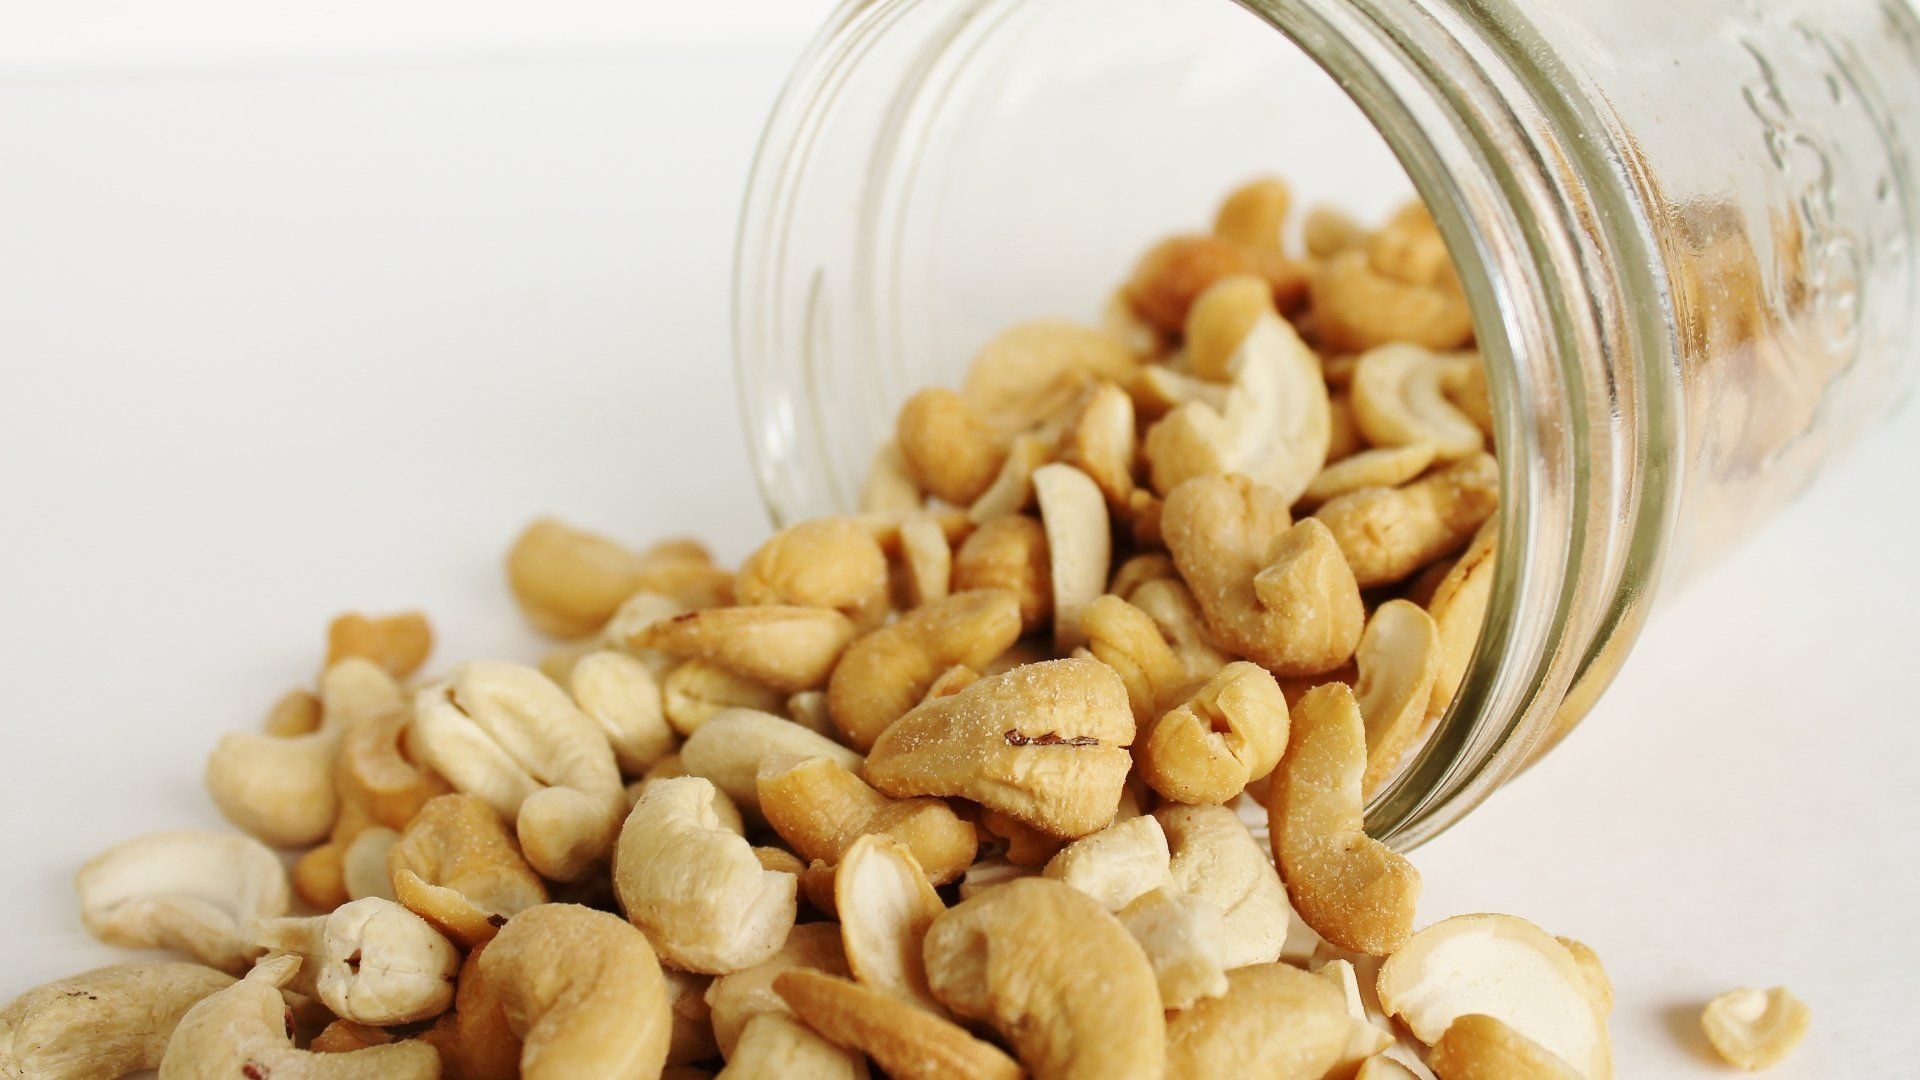 Cashew Nuts: Sold both raw or roasted, and salted or unsalted, A good source of protein. 1920x1080 Full HD Background.